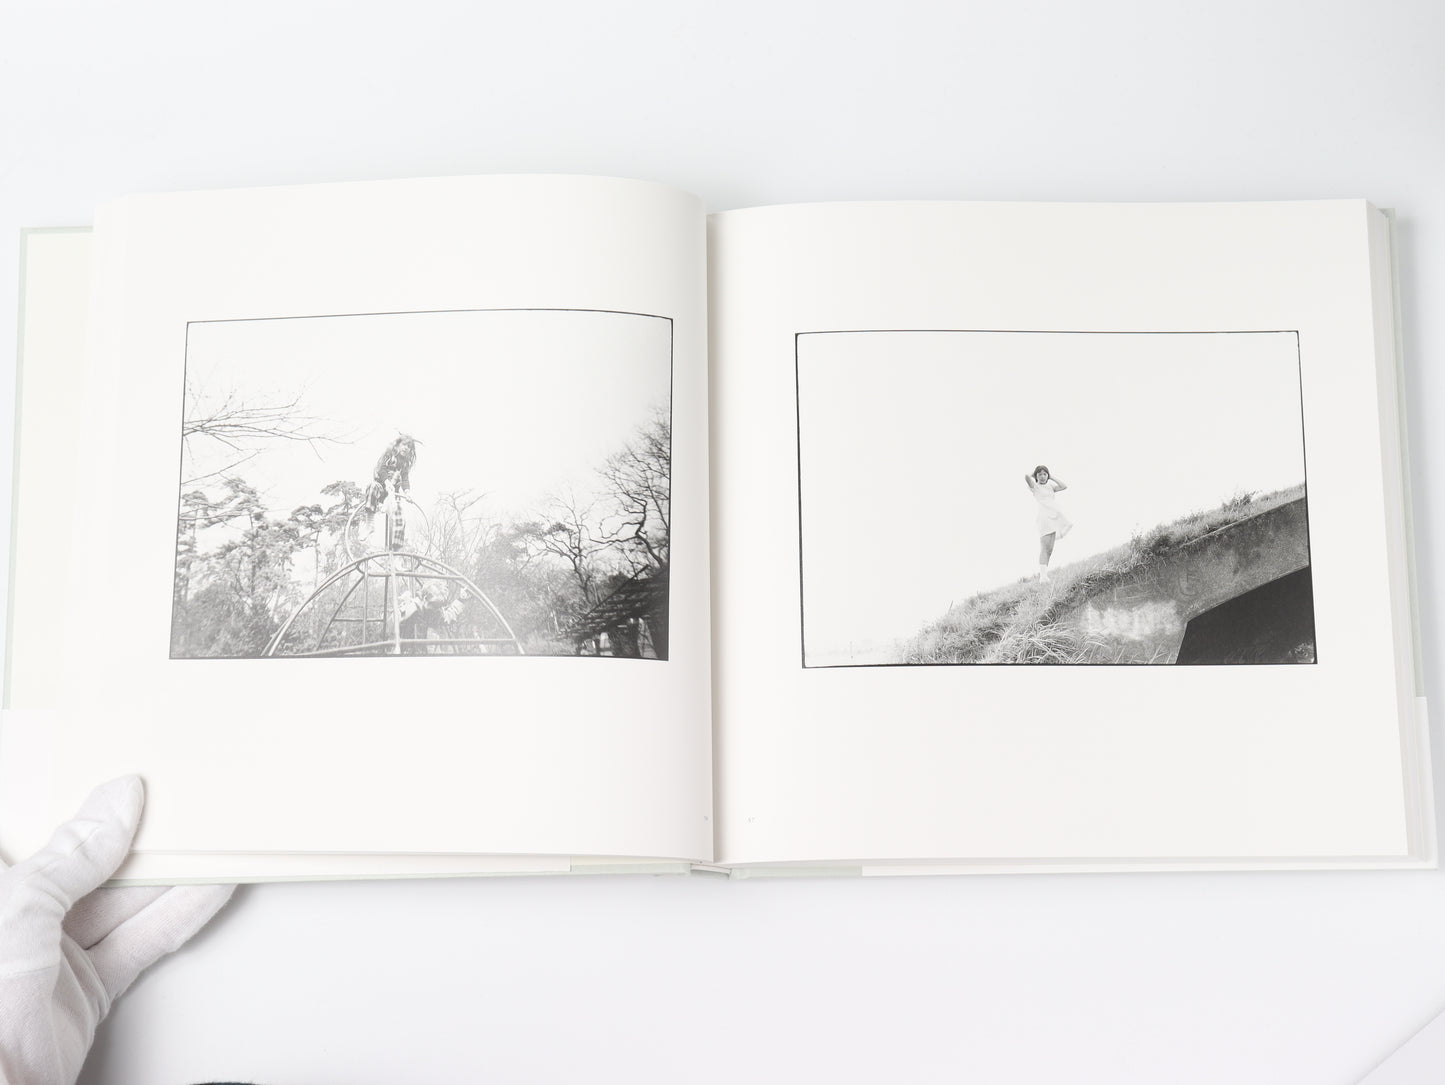 The Complete Works of Shigeo Gocho